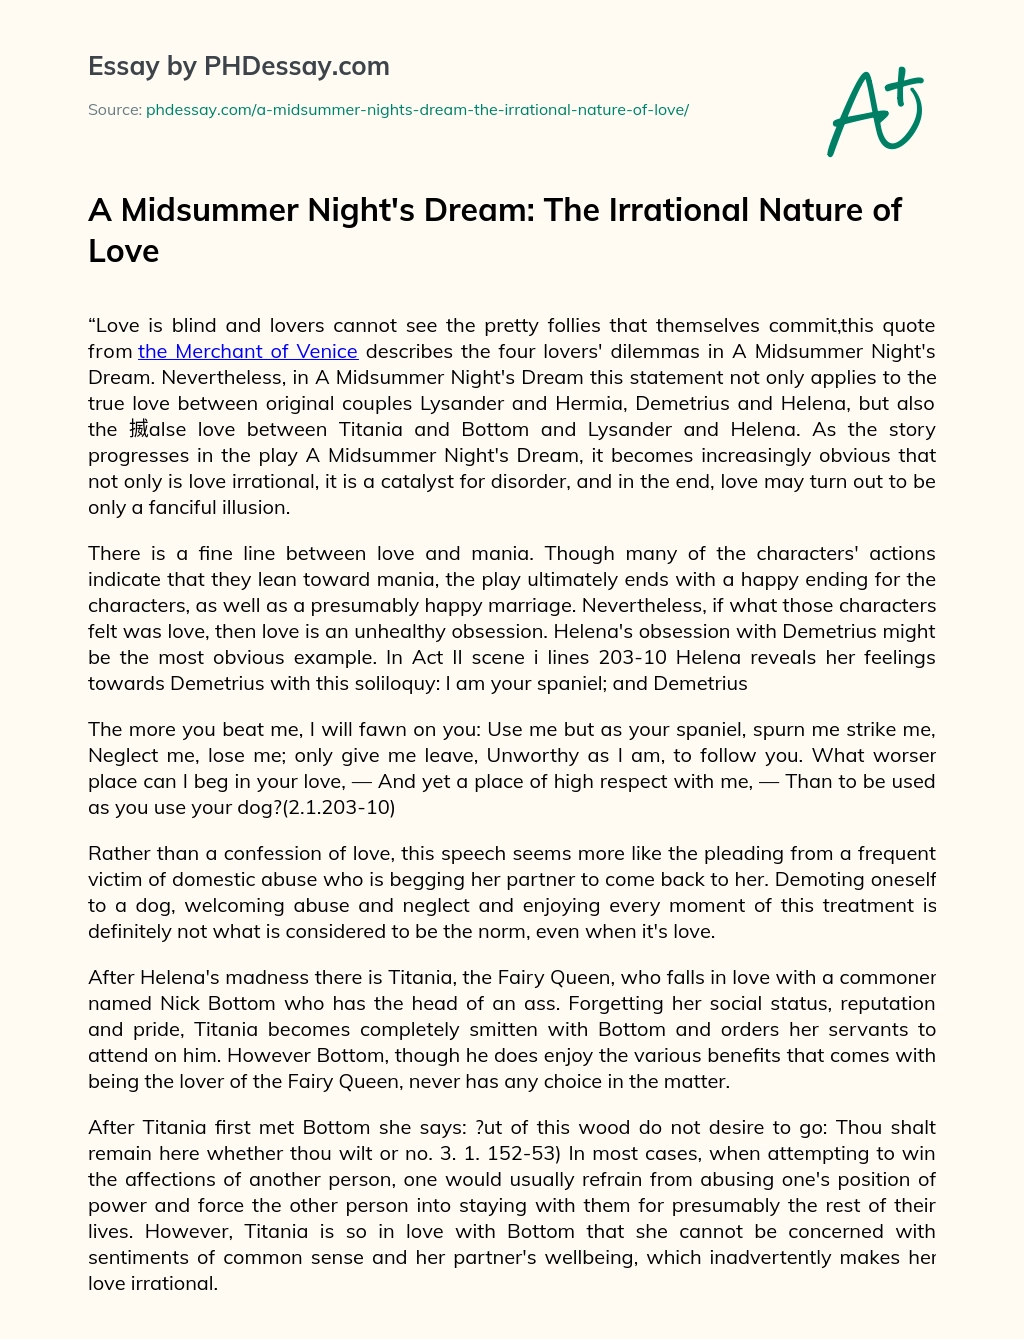 A Midsummer Night’s Dream: The Irrational Nature of Love essay